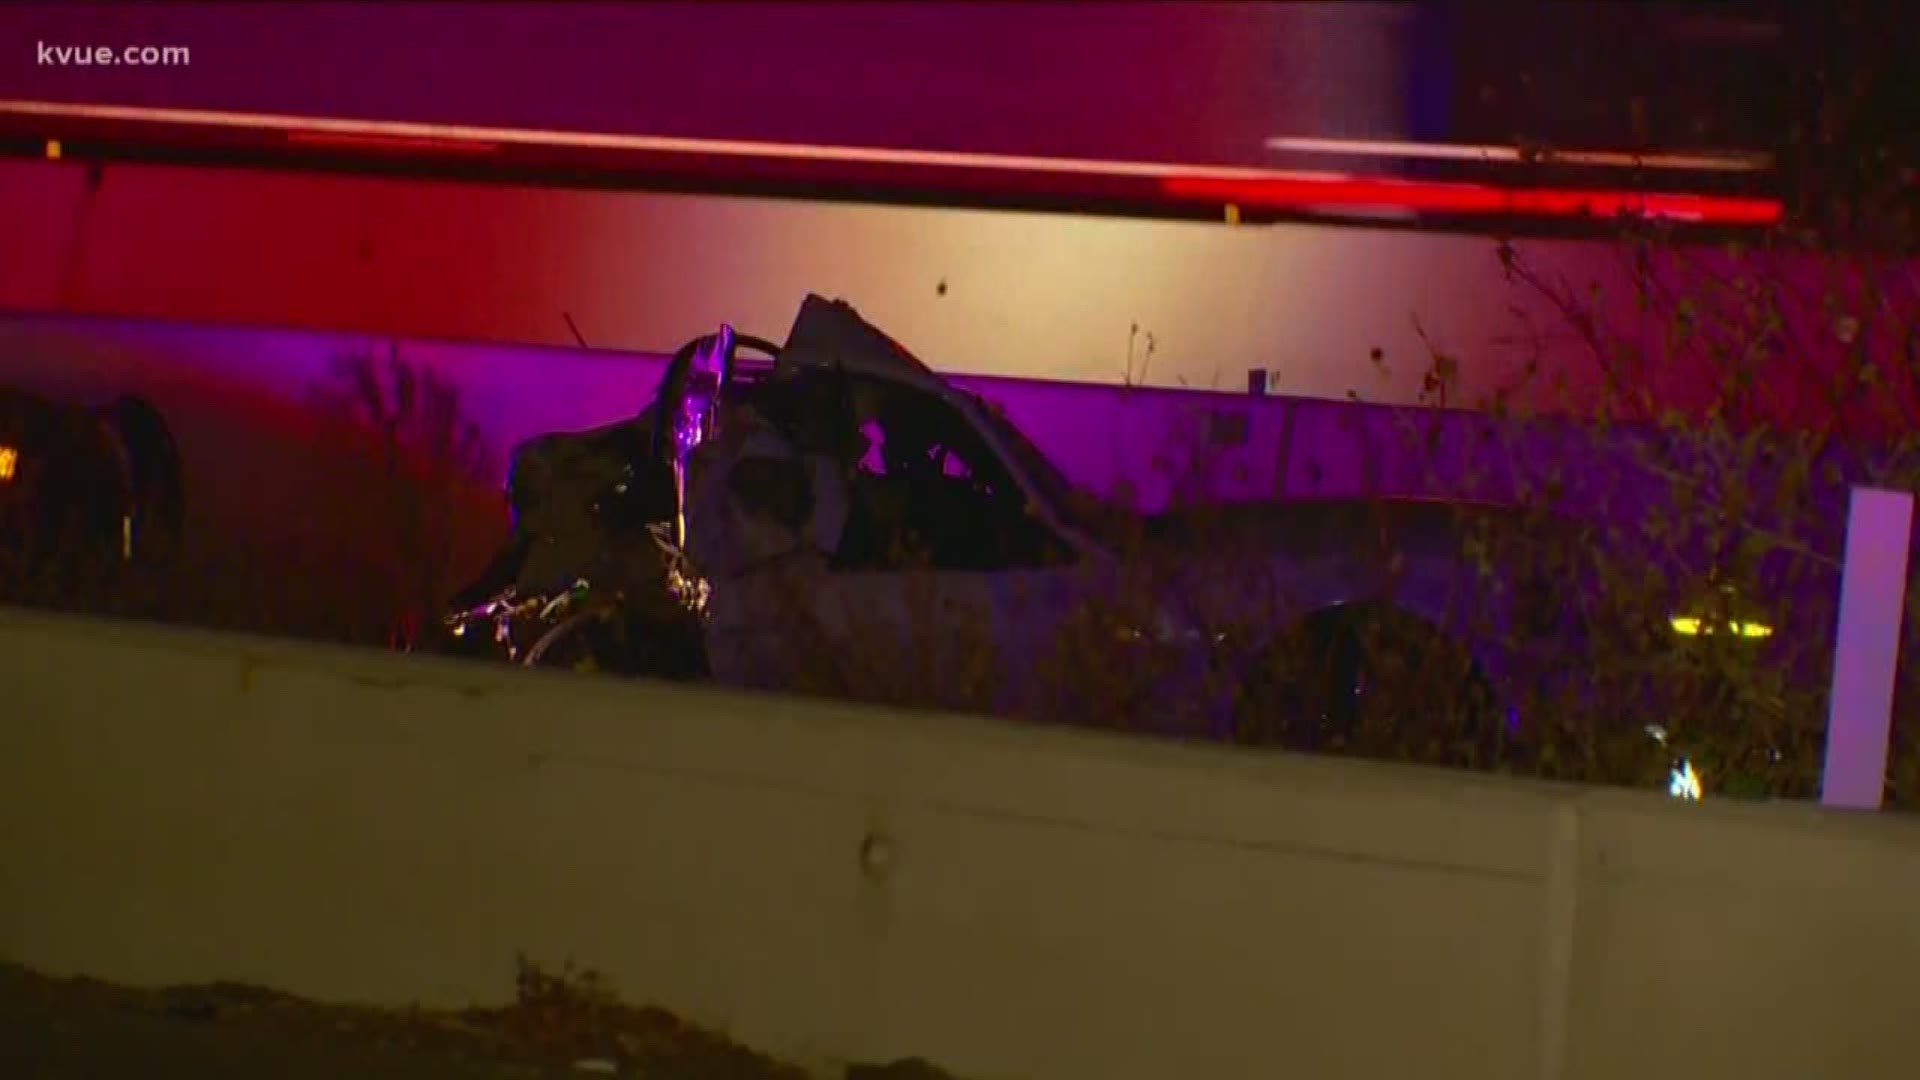 According to the Austin-Travis County EMS, the crash involved a vehicle and an 18-wheeler. A man was killed in the crash and was pronounced dead at the scene, ATCEMS